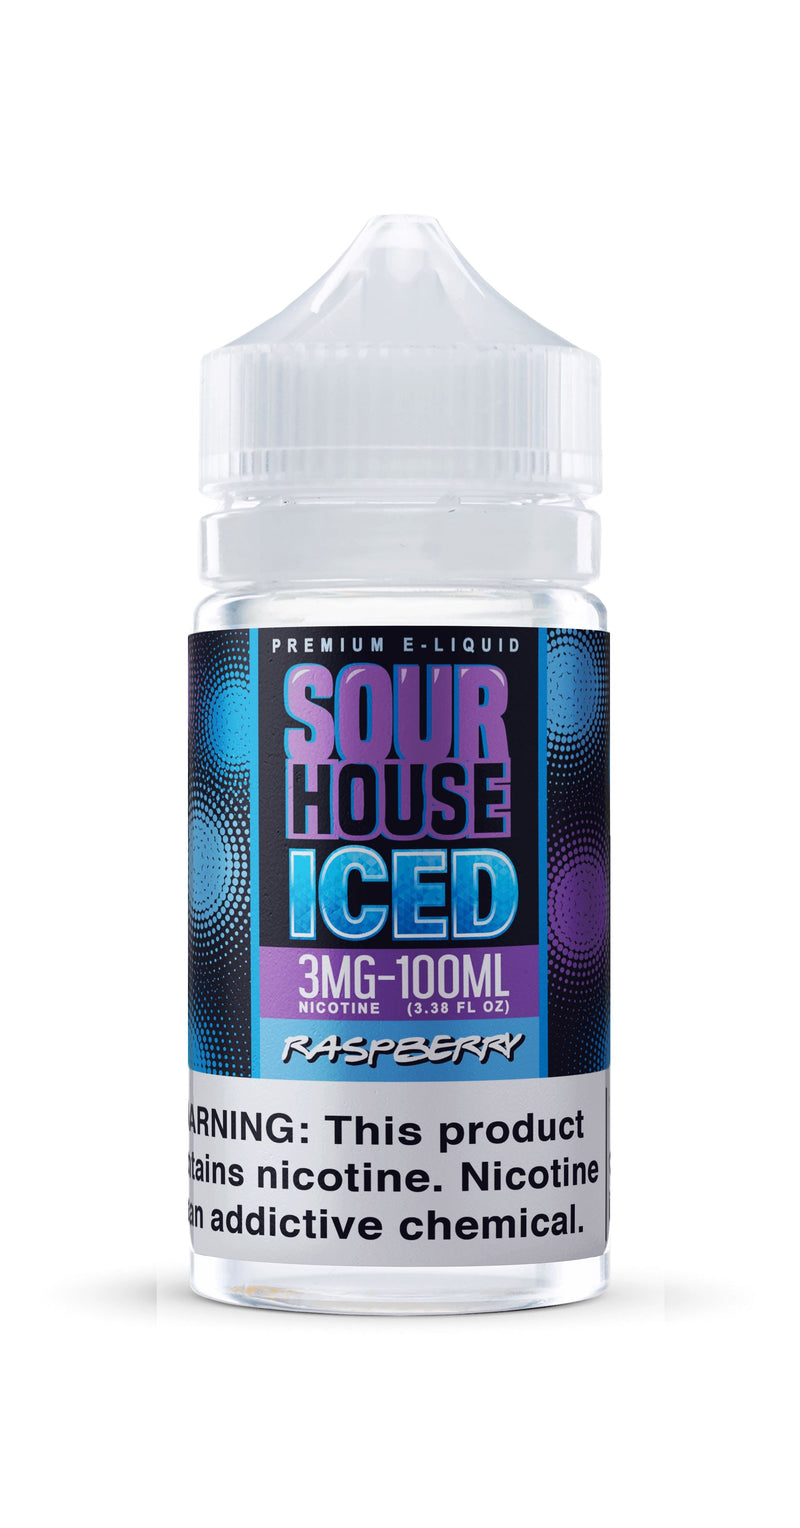 Raspberry by Sour House Iced 100ml bottle